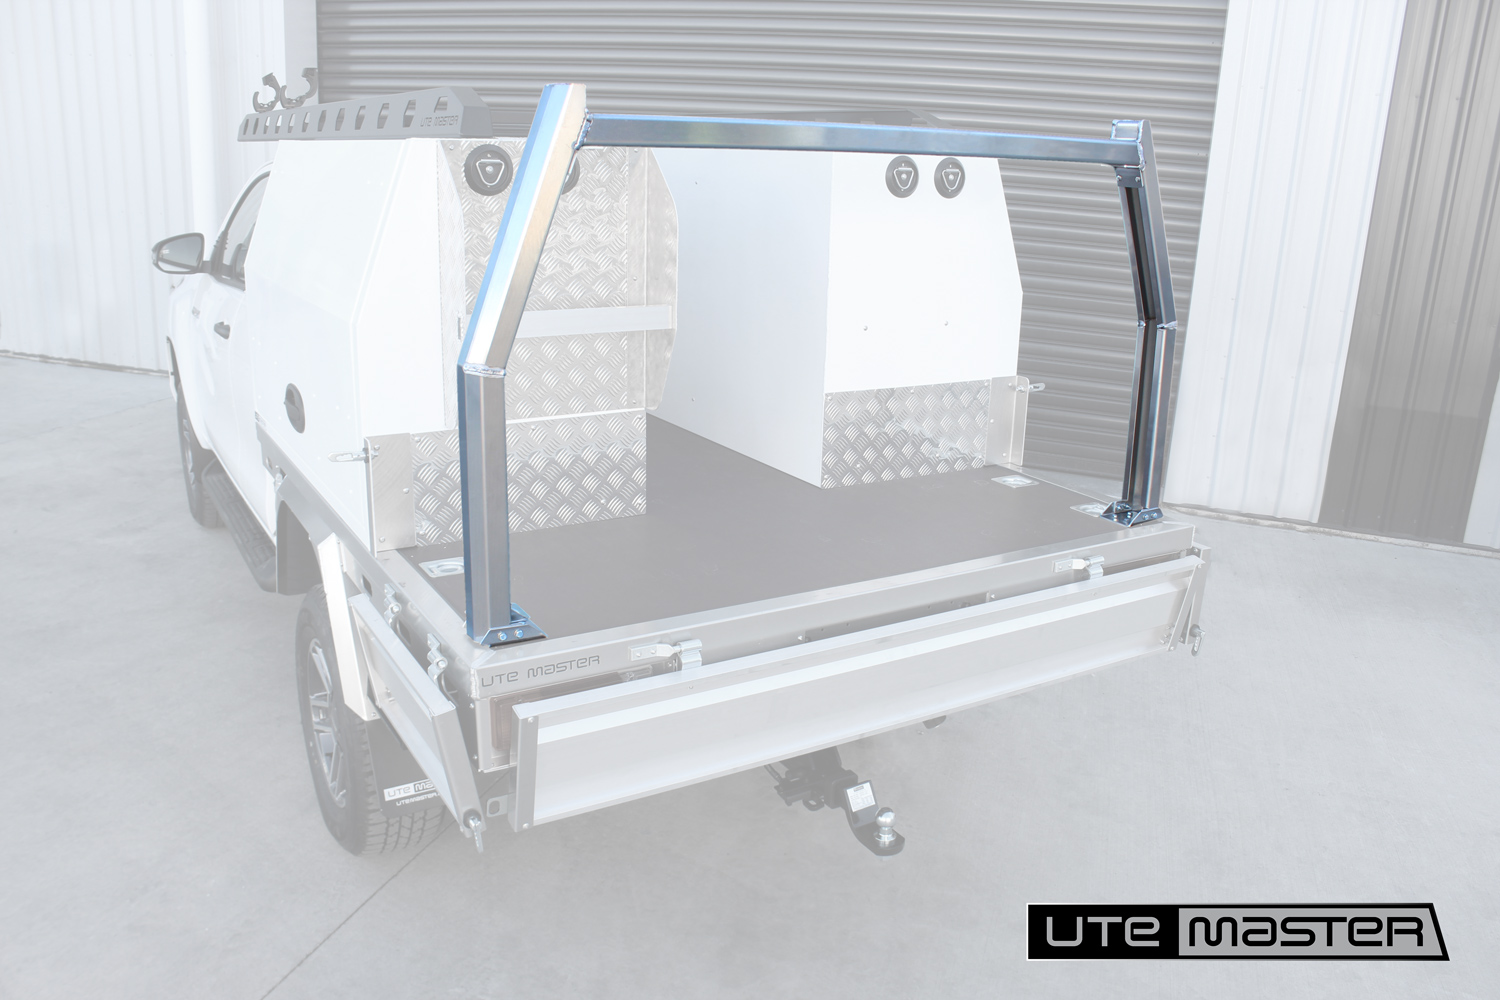 Rear Ladder Rack to suit Utemaster Commercial Ute Fitout